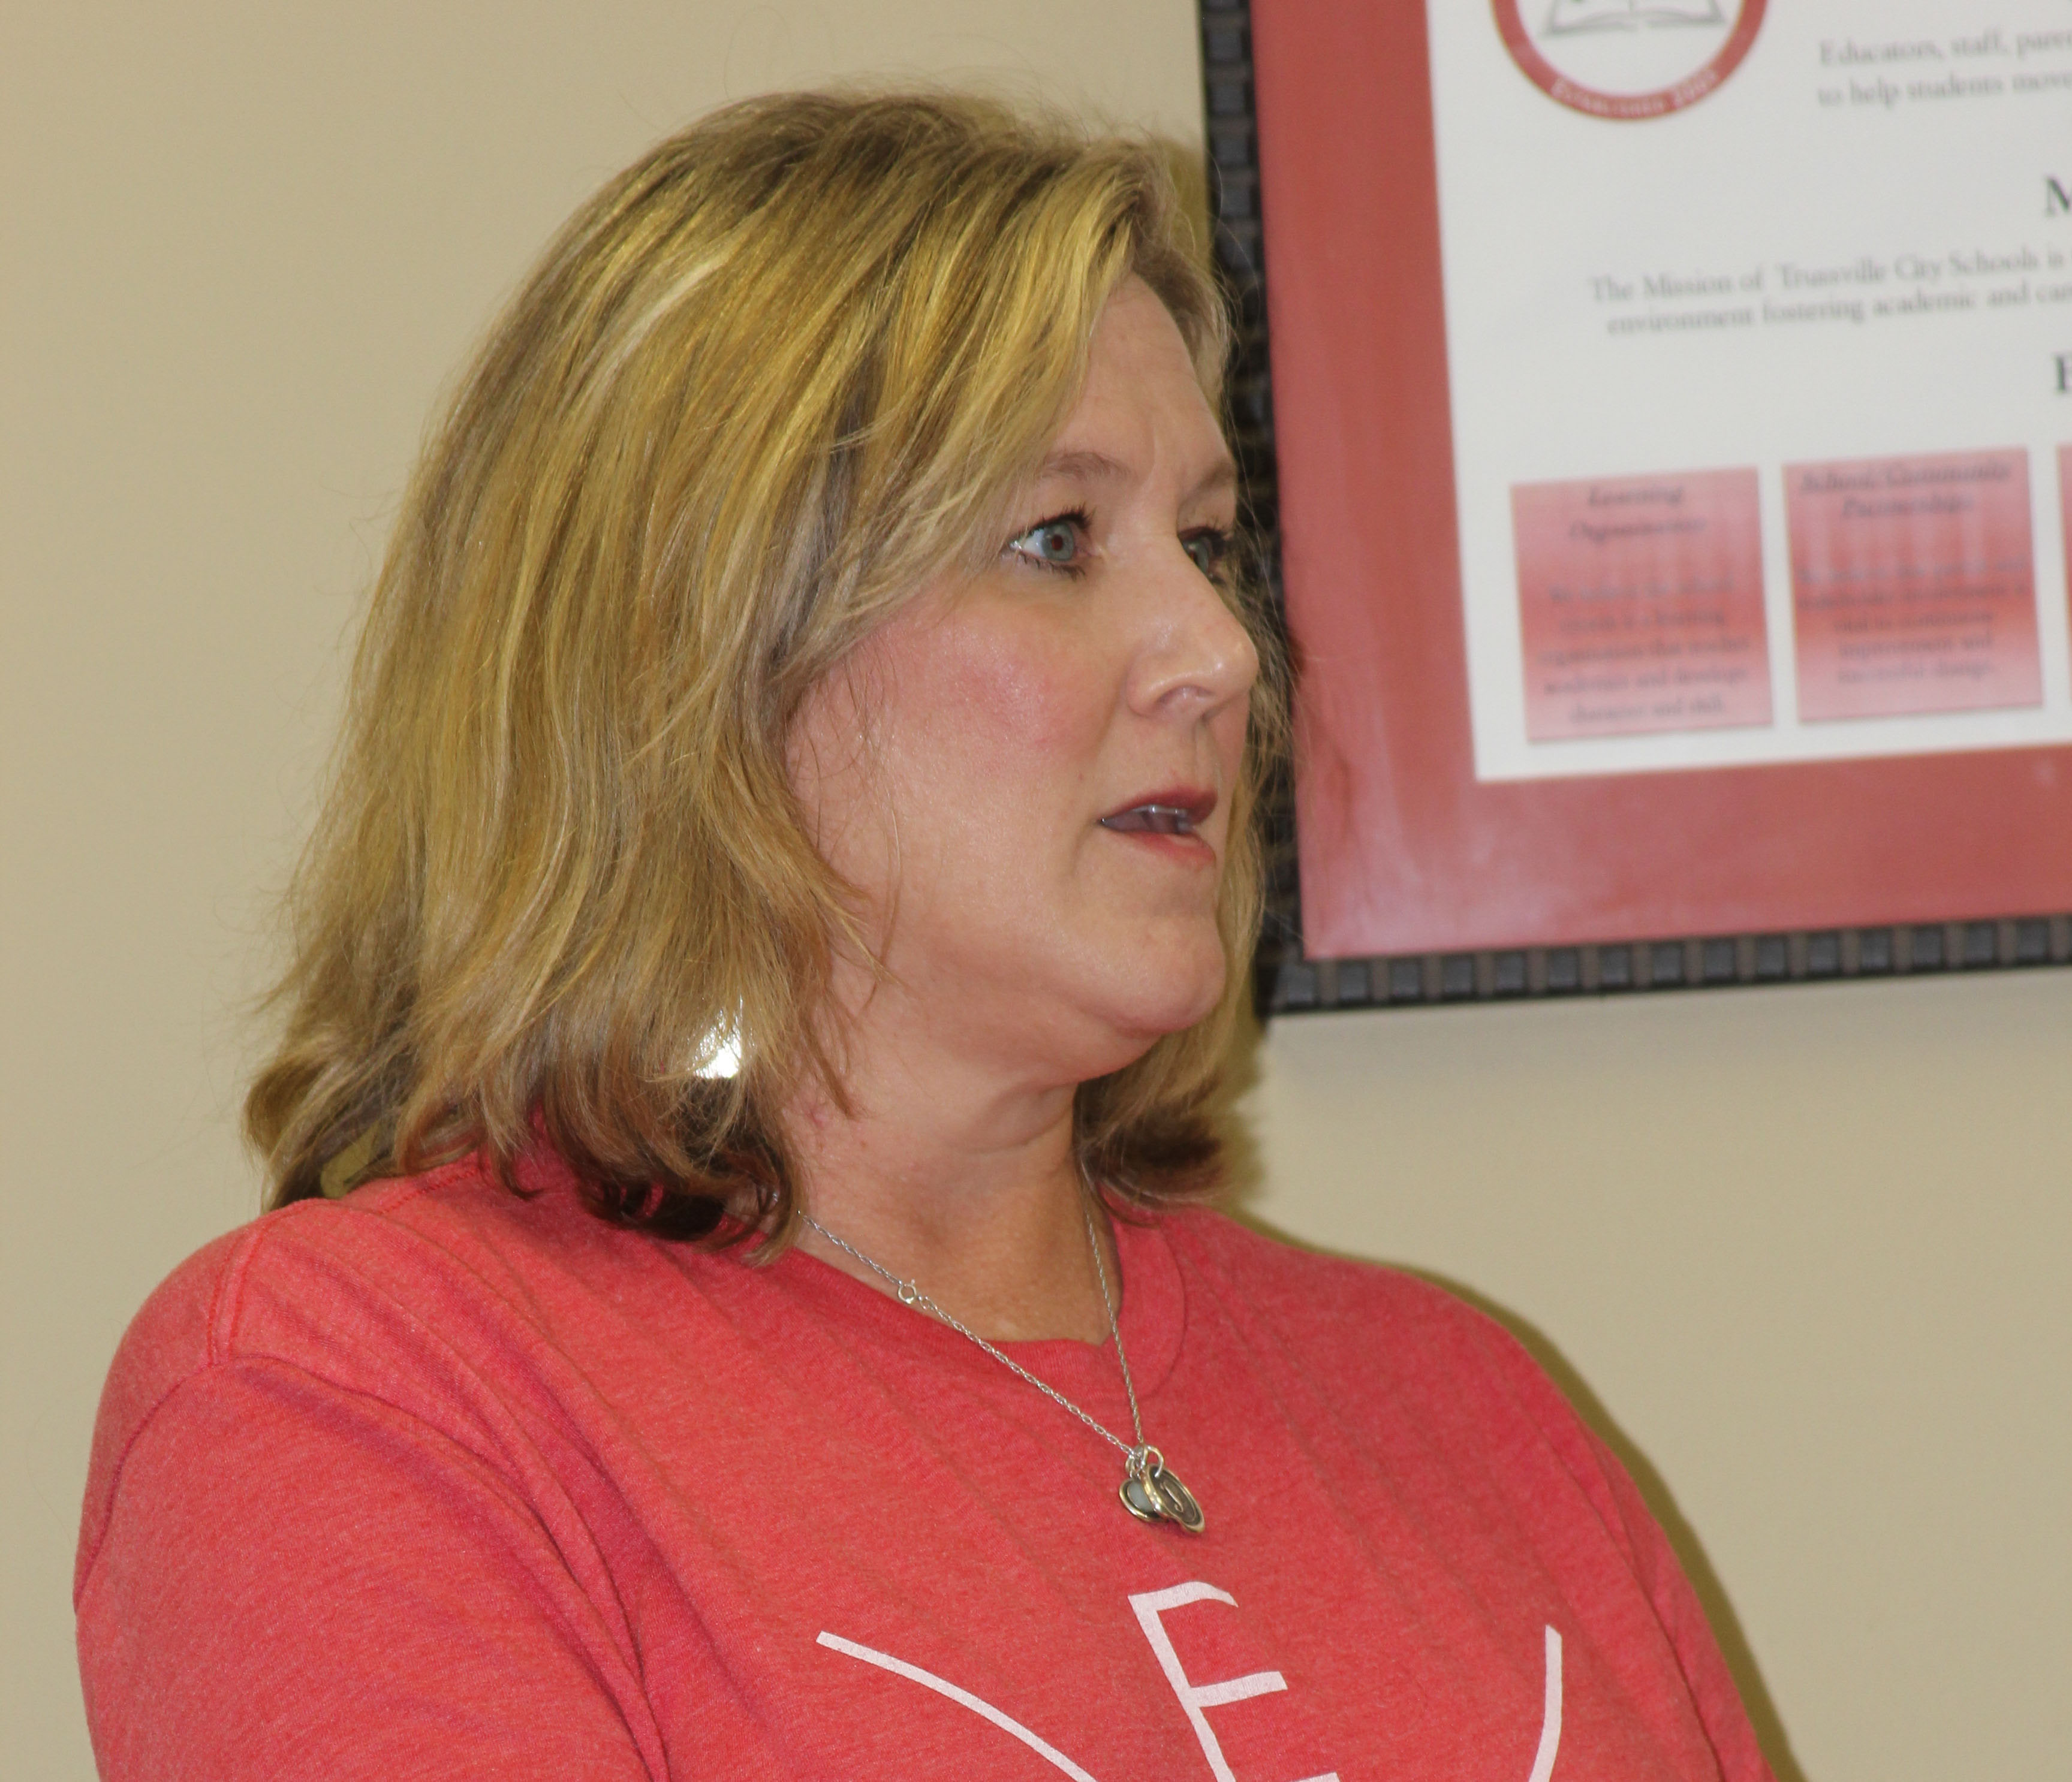 Local special education advocate speaks to Trussville City BOE about school inclusion